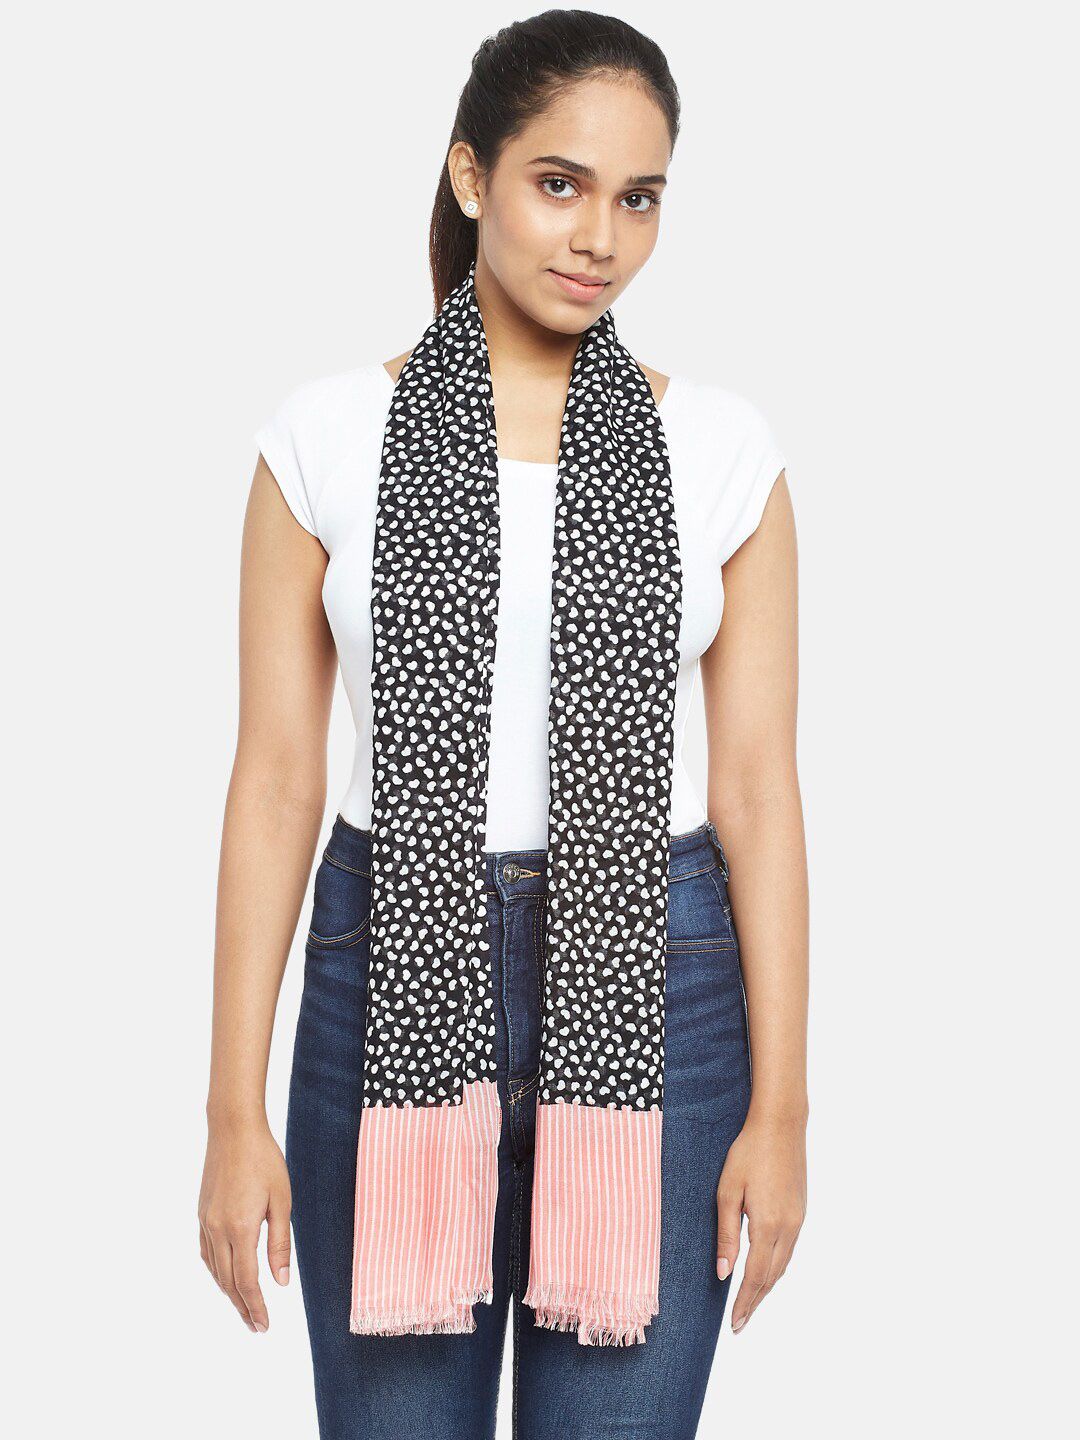 Honey by Pantaloons Women Black & White Printed Scarf Price in India